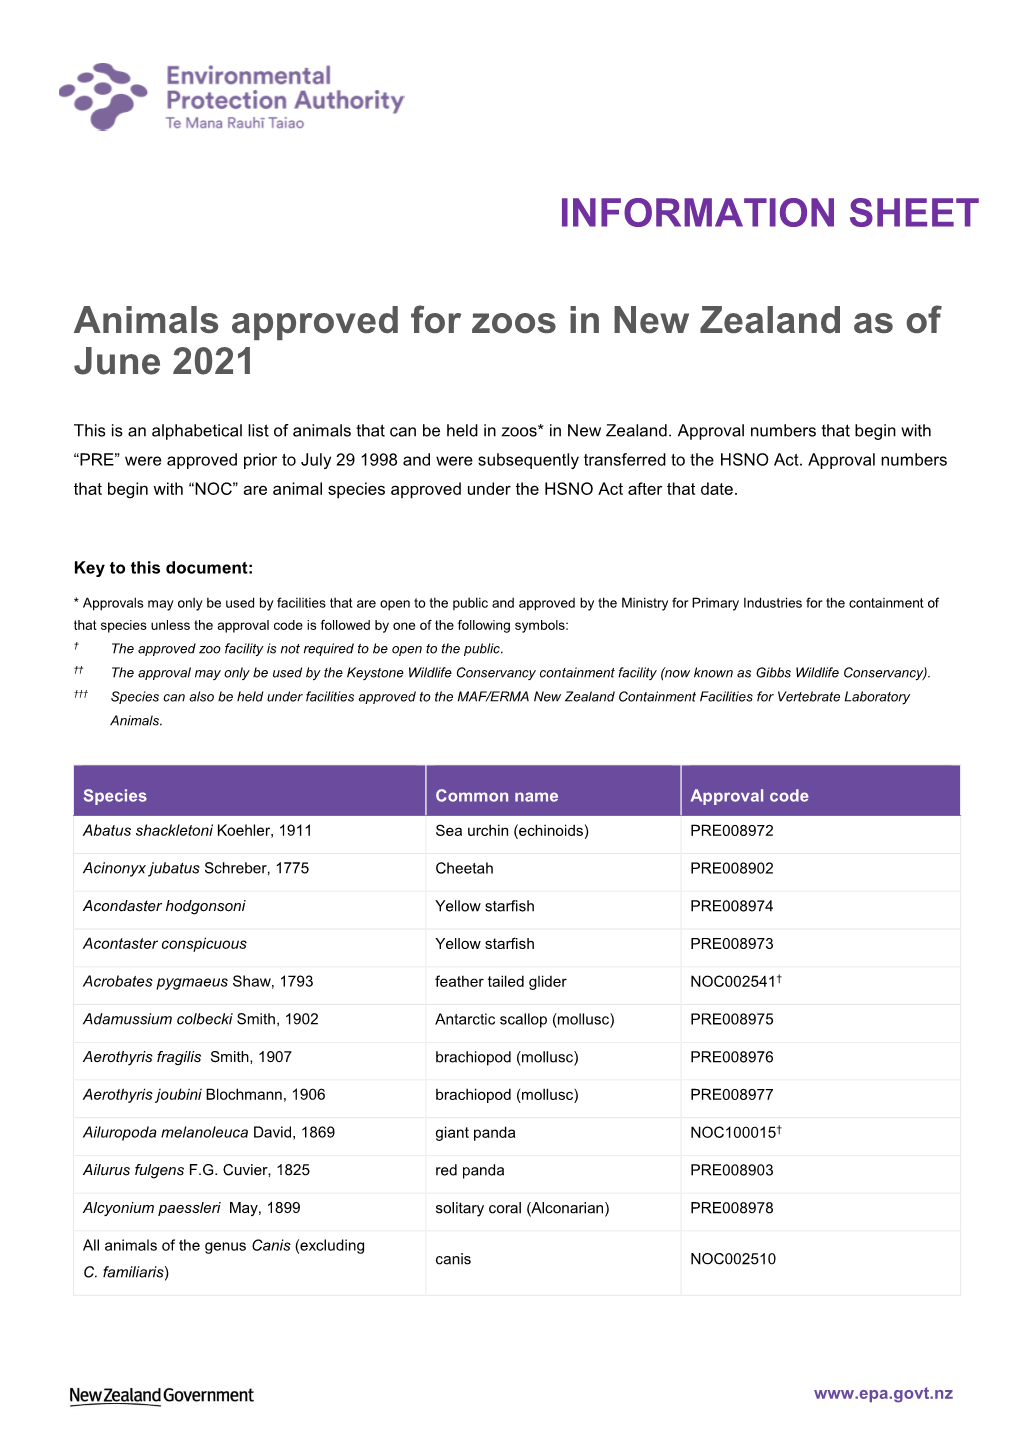 Animals Approved for Zoos in New Zealand As of June 2021